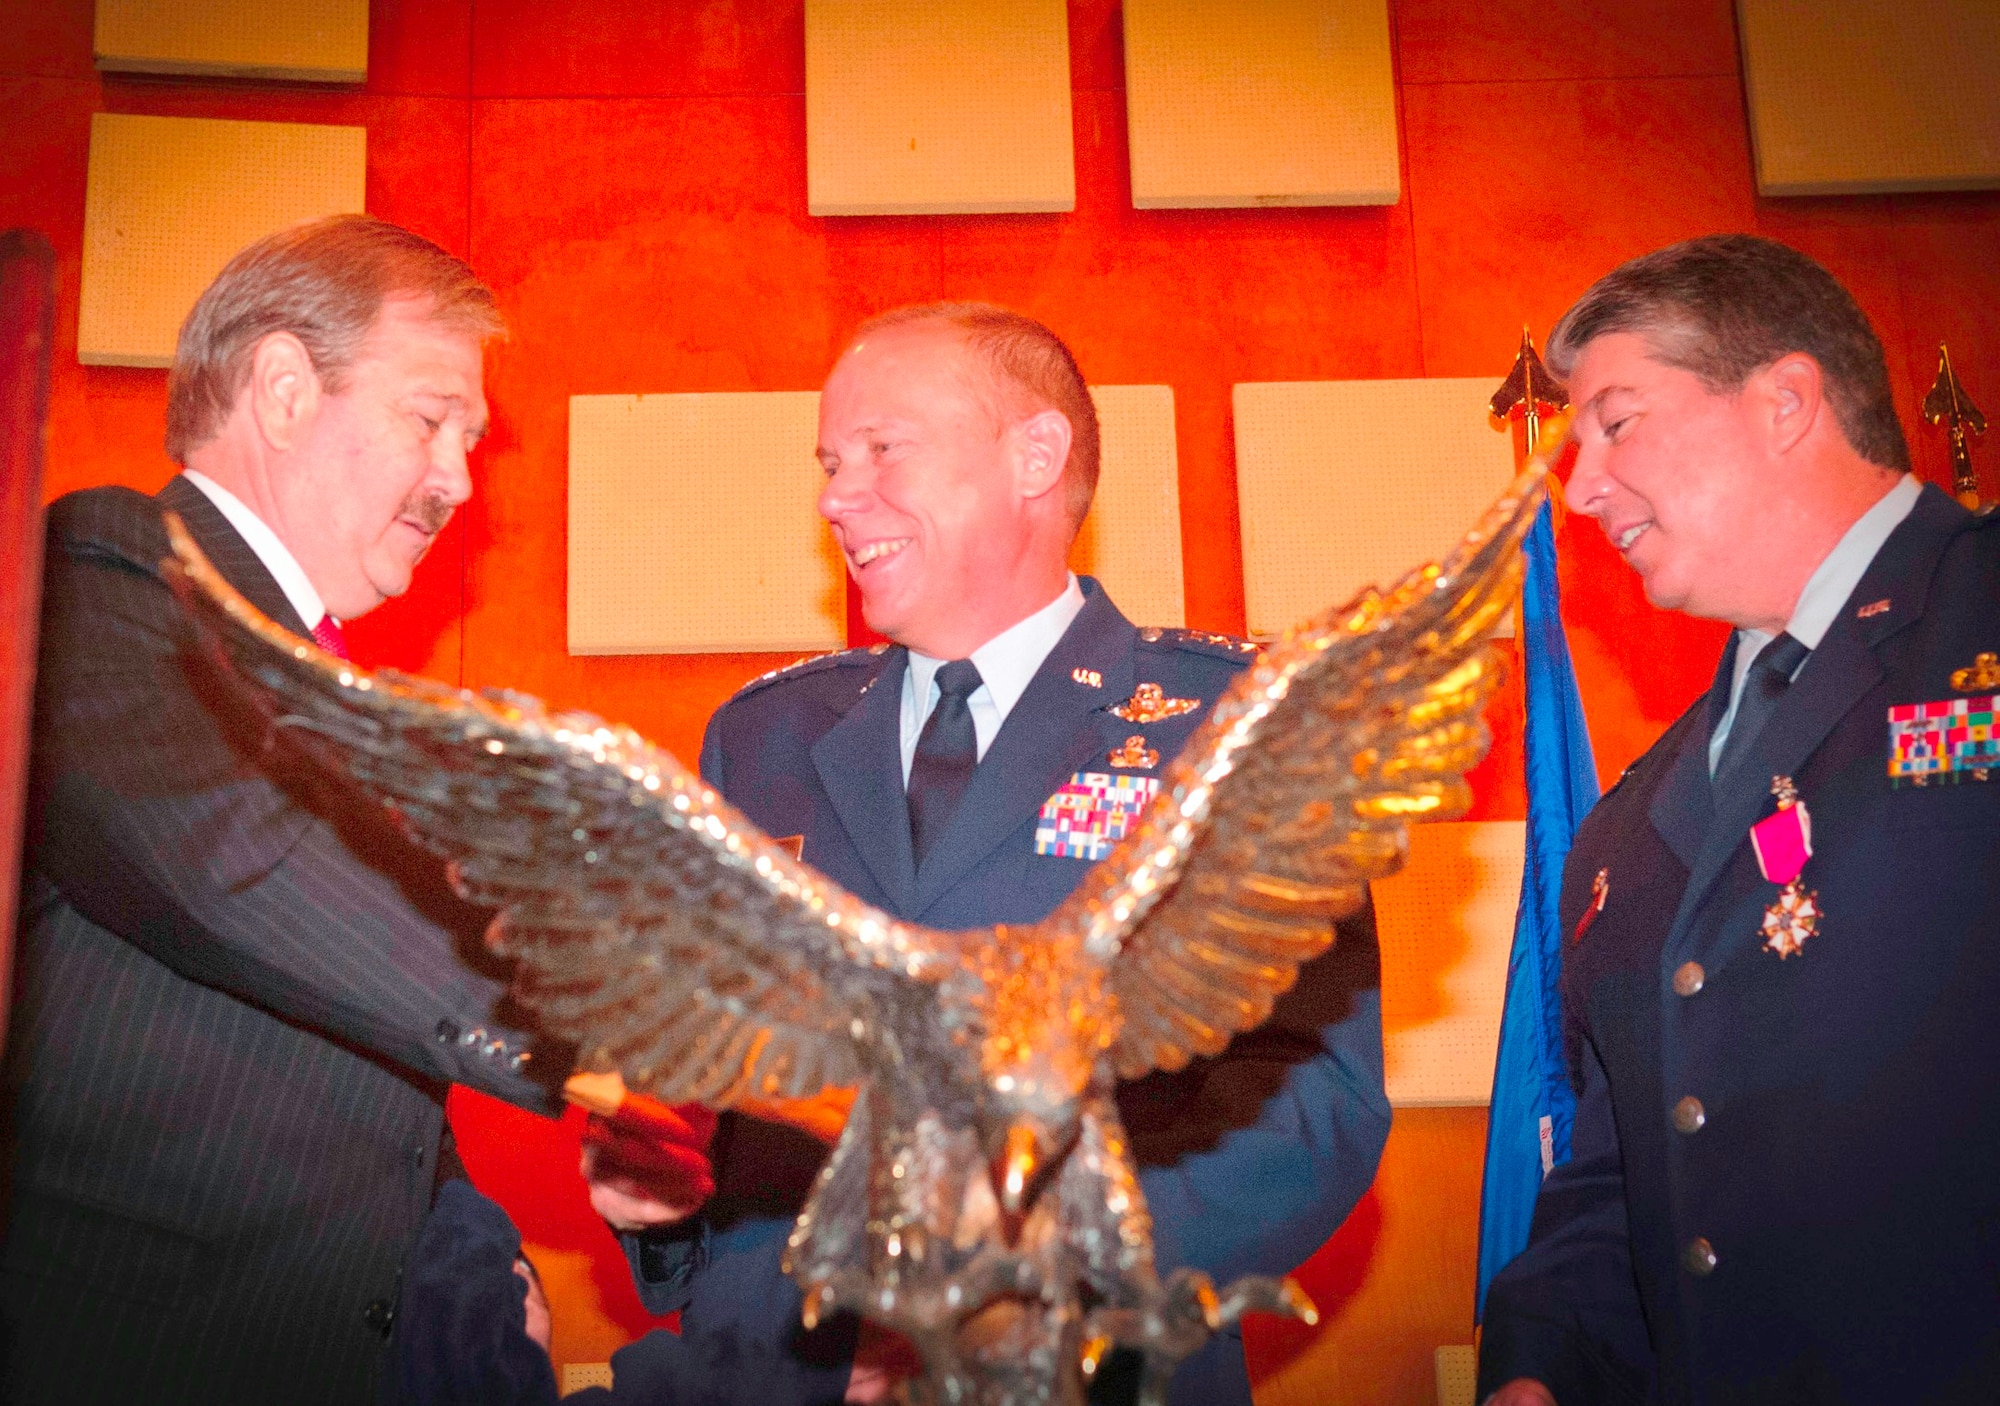 Donald E. Jakeway (left), president and CEO of the Brooks Development Authority, presents AFMC with a brass rendition of a landing eagle in appreciation of the command’s support as Brooks transitioned towards closure.   AFMC Commander Gen. Donald J. Hoffman (center) accepts the trophy on behalf of the command, as Col. Harry R. Kimberly III, 311th Air Base Group commander, observes.  (U.S. Air Force photo/Steve Thurow)